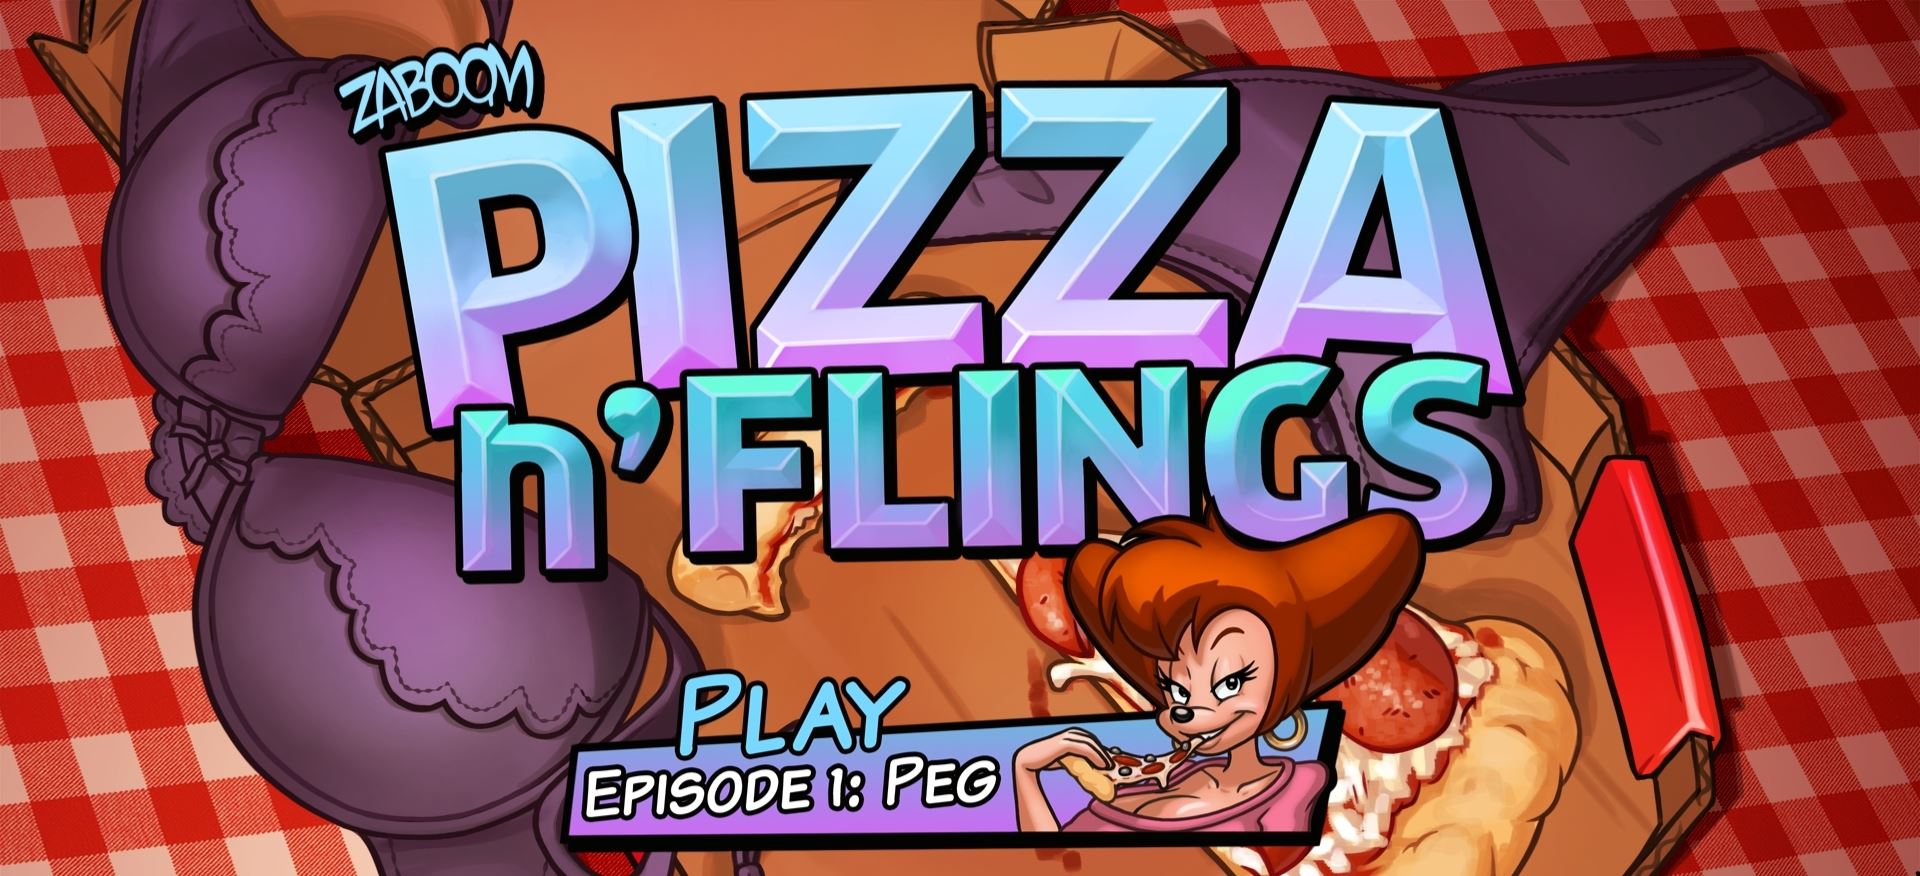 Pizza n’ Flings porn xxx game download cover